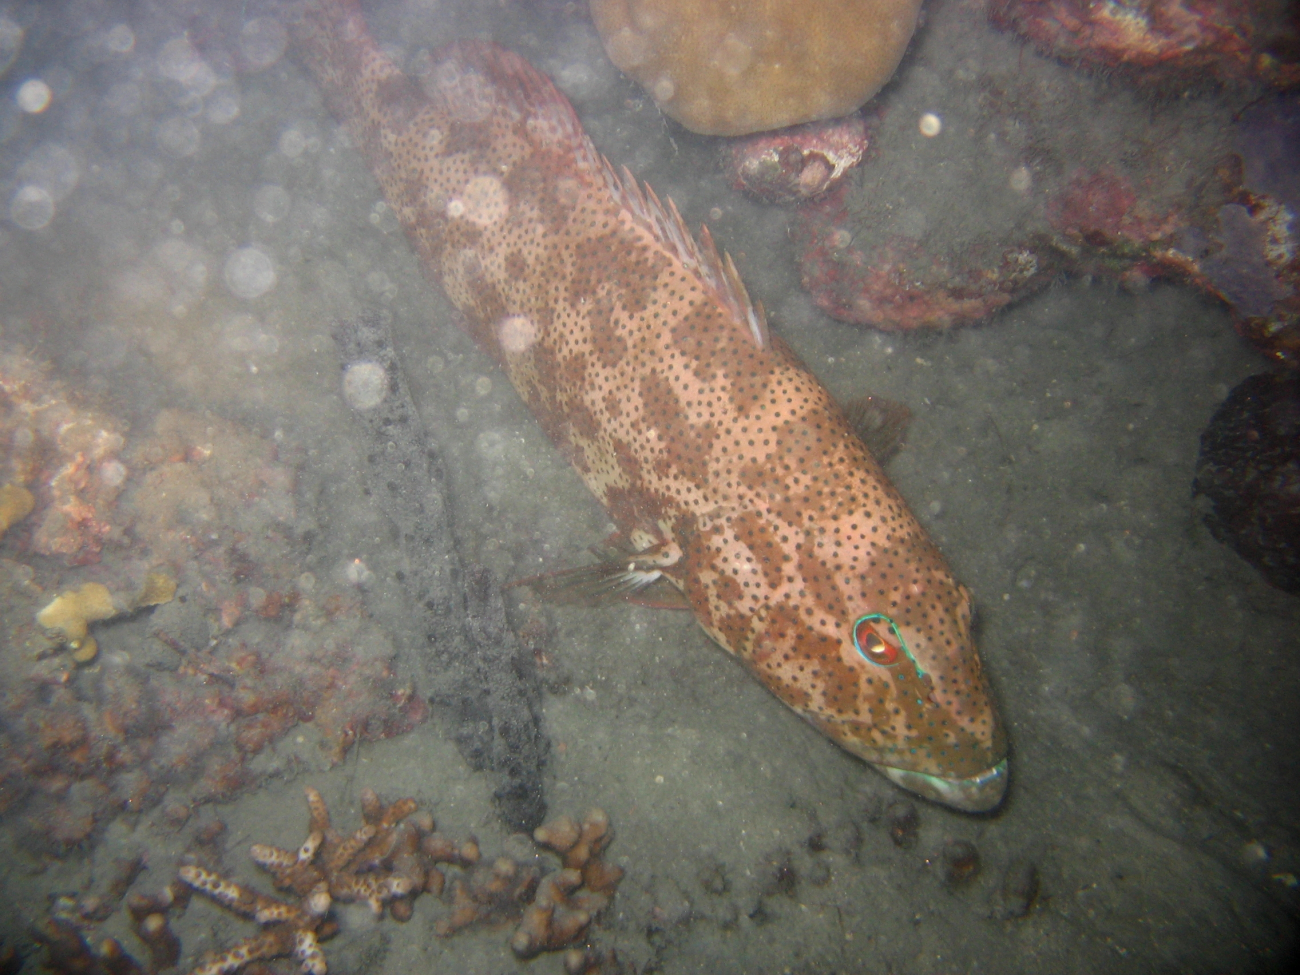 Spotted grouper